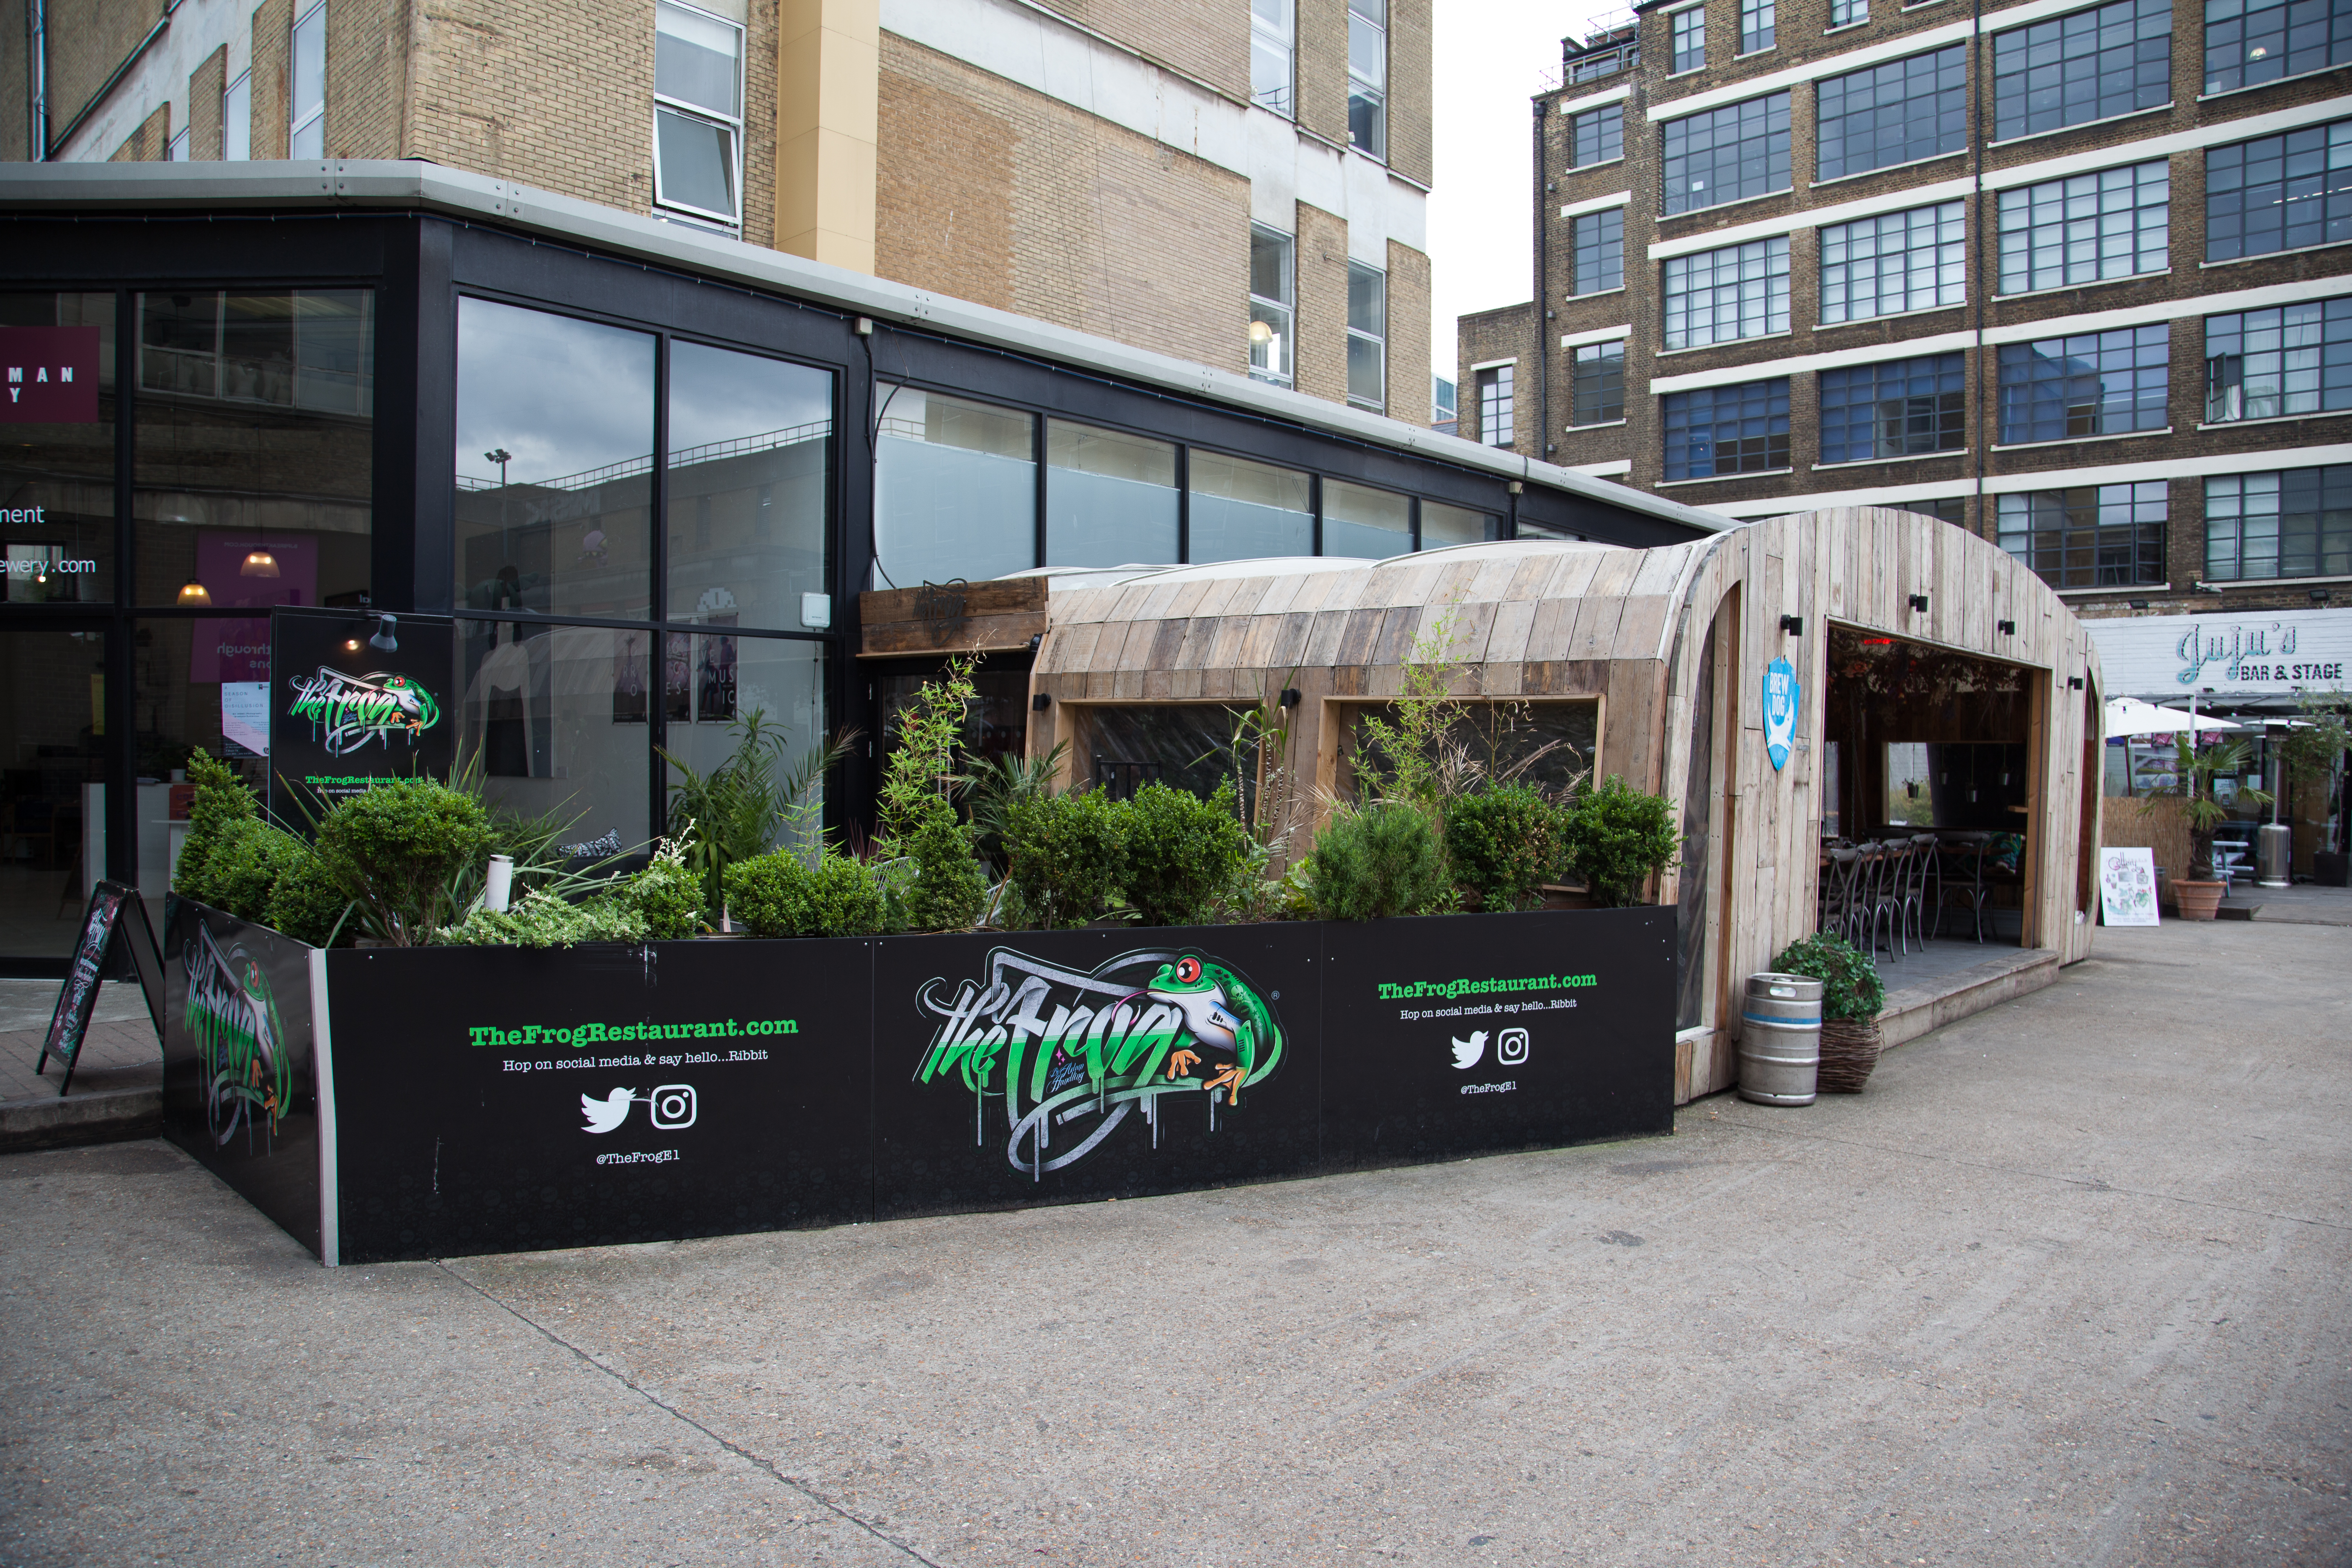 An Afternoon at... The Frog E1 by Adam Handling 15